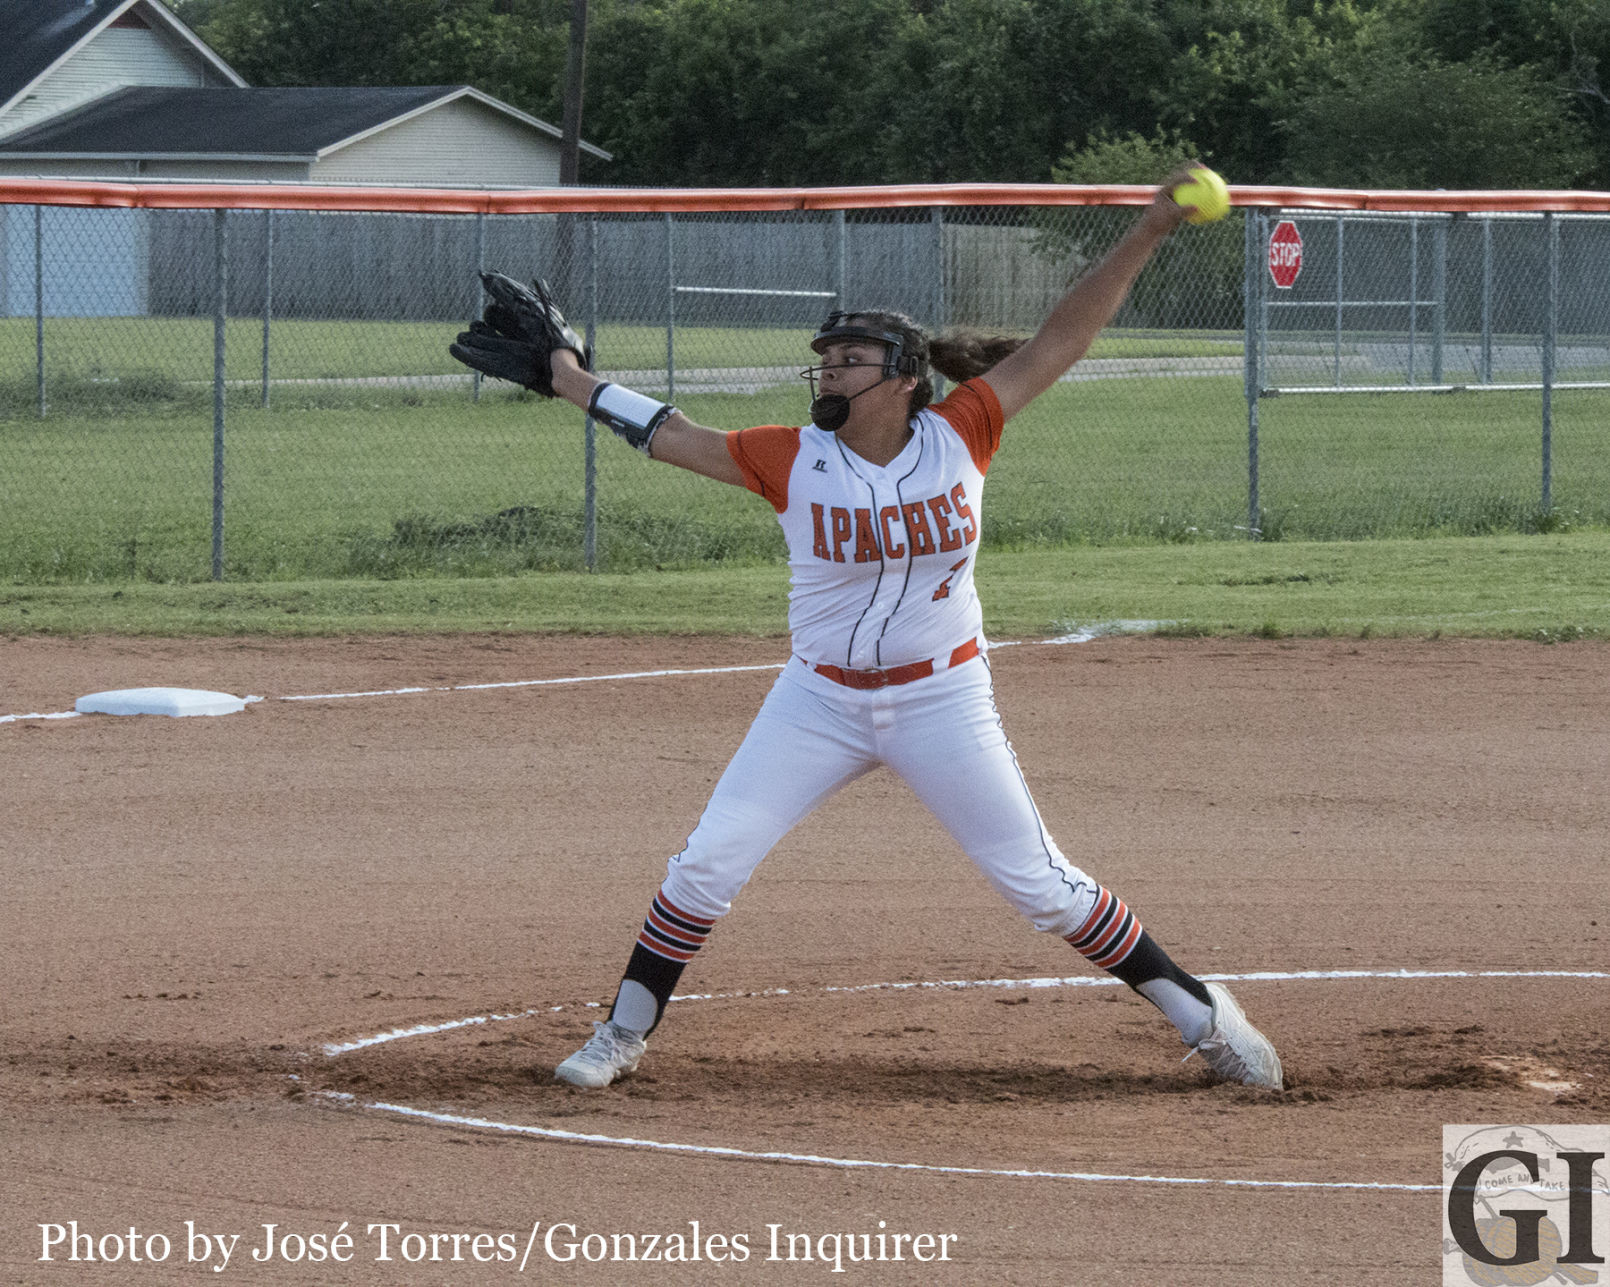 Carla Torres’ return to the mound has shown to be a boost for the Lady Apaches as head coach Sam White now has two quality pitchers he can rely on for the playoffs. Torres struck out five as she pitched all seven innings in their 5-1 win.